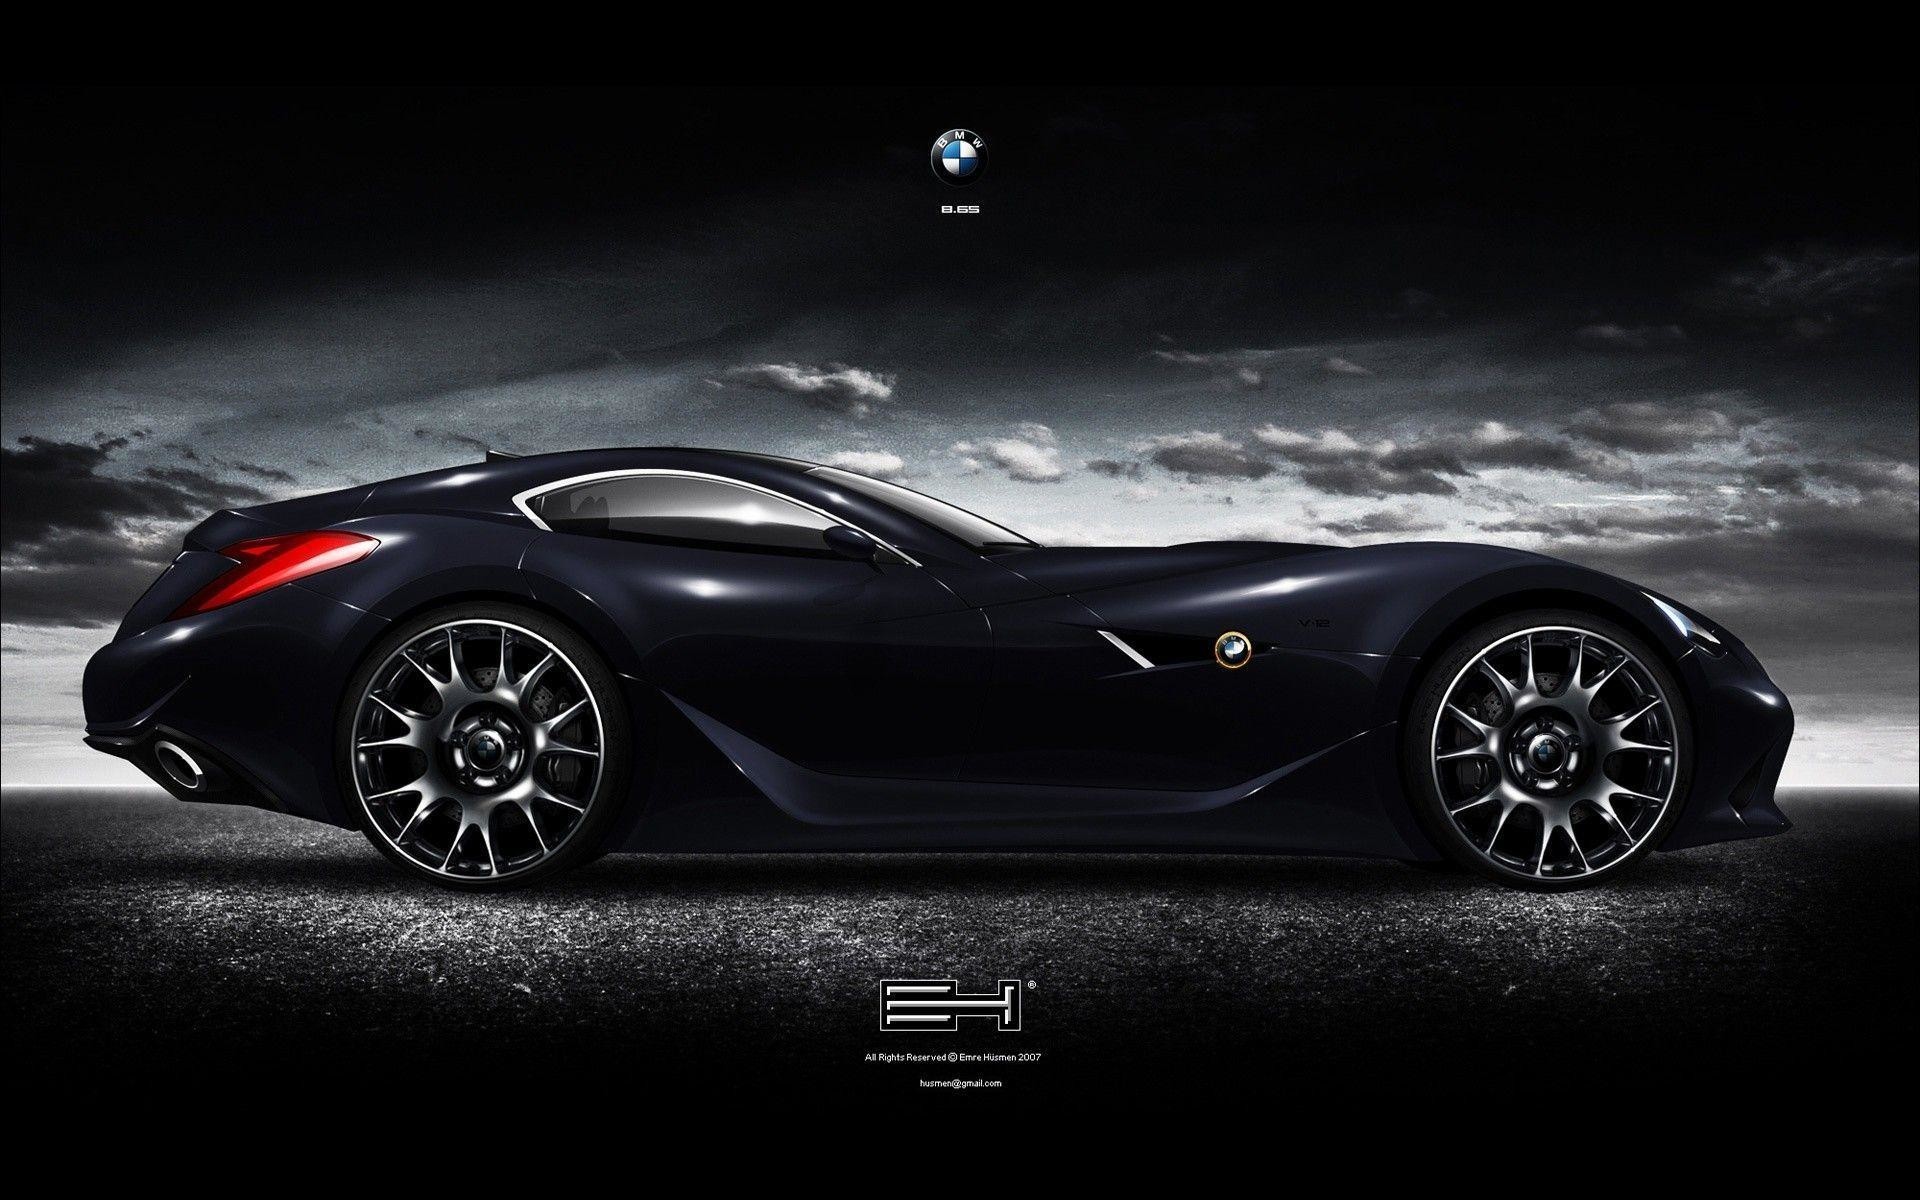 supercar wallpaper hd for android,land vehicle,car,automotive design,vehicle,sports car